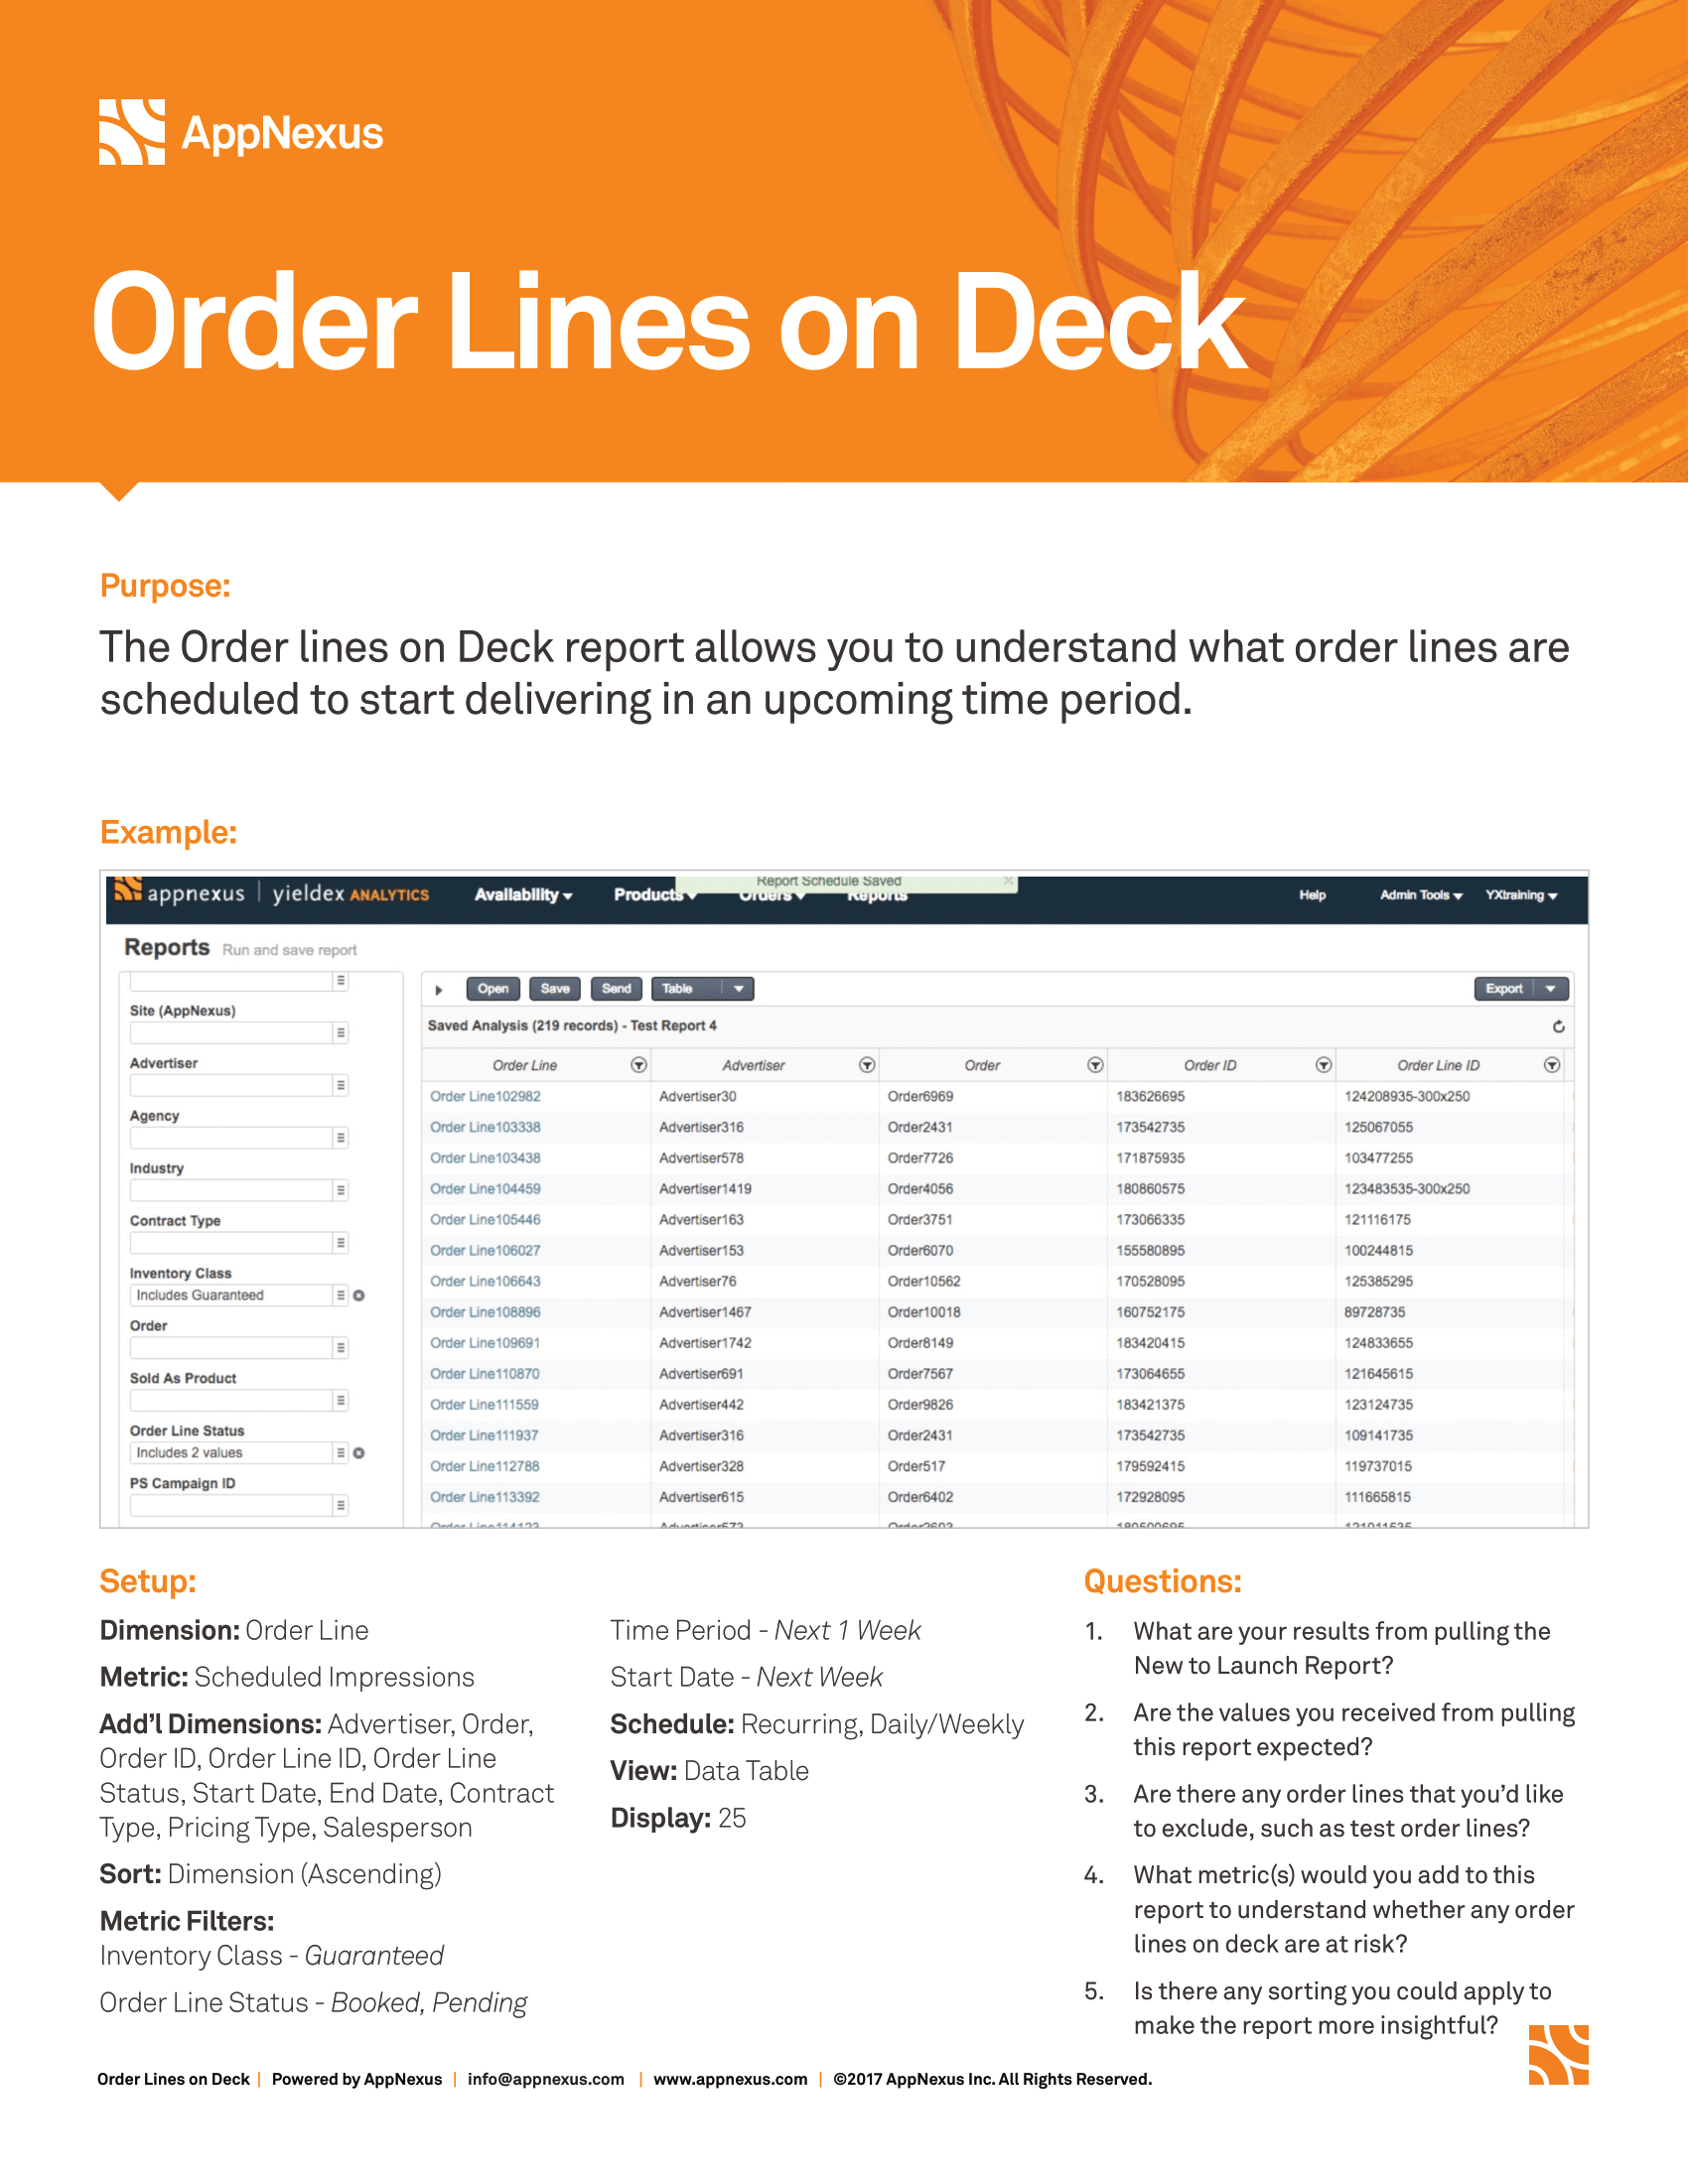 Screenshot that provides details about the Order Lines on Deck report.